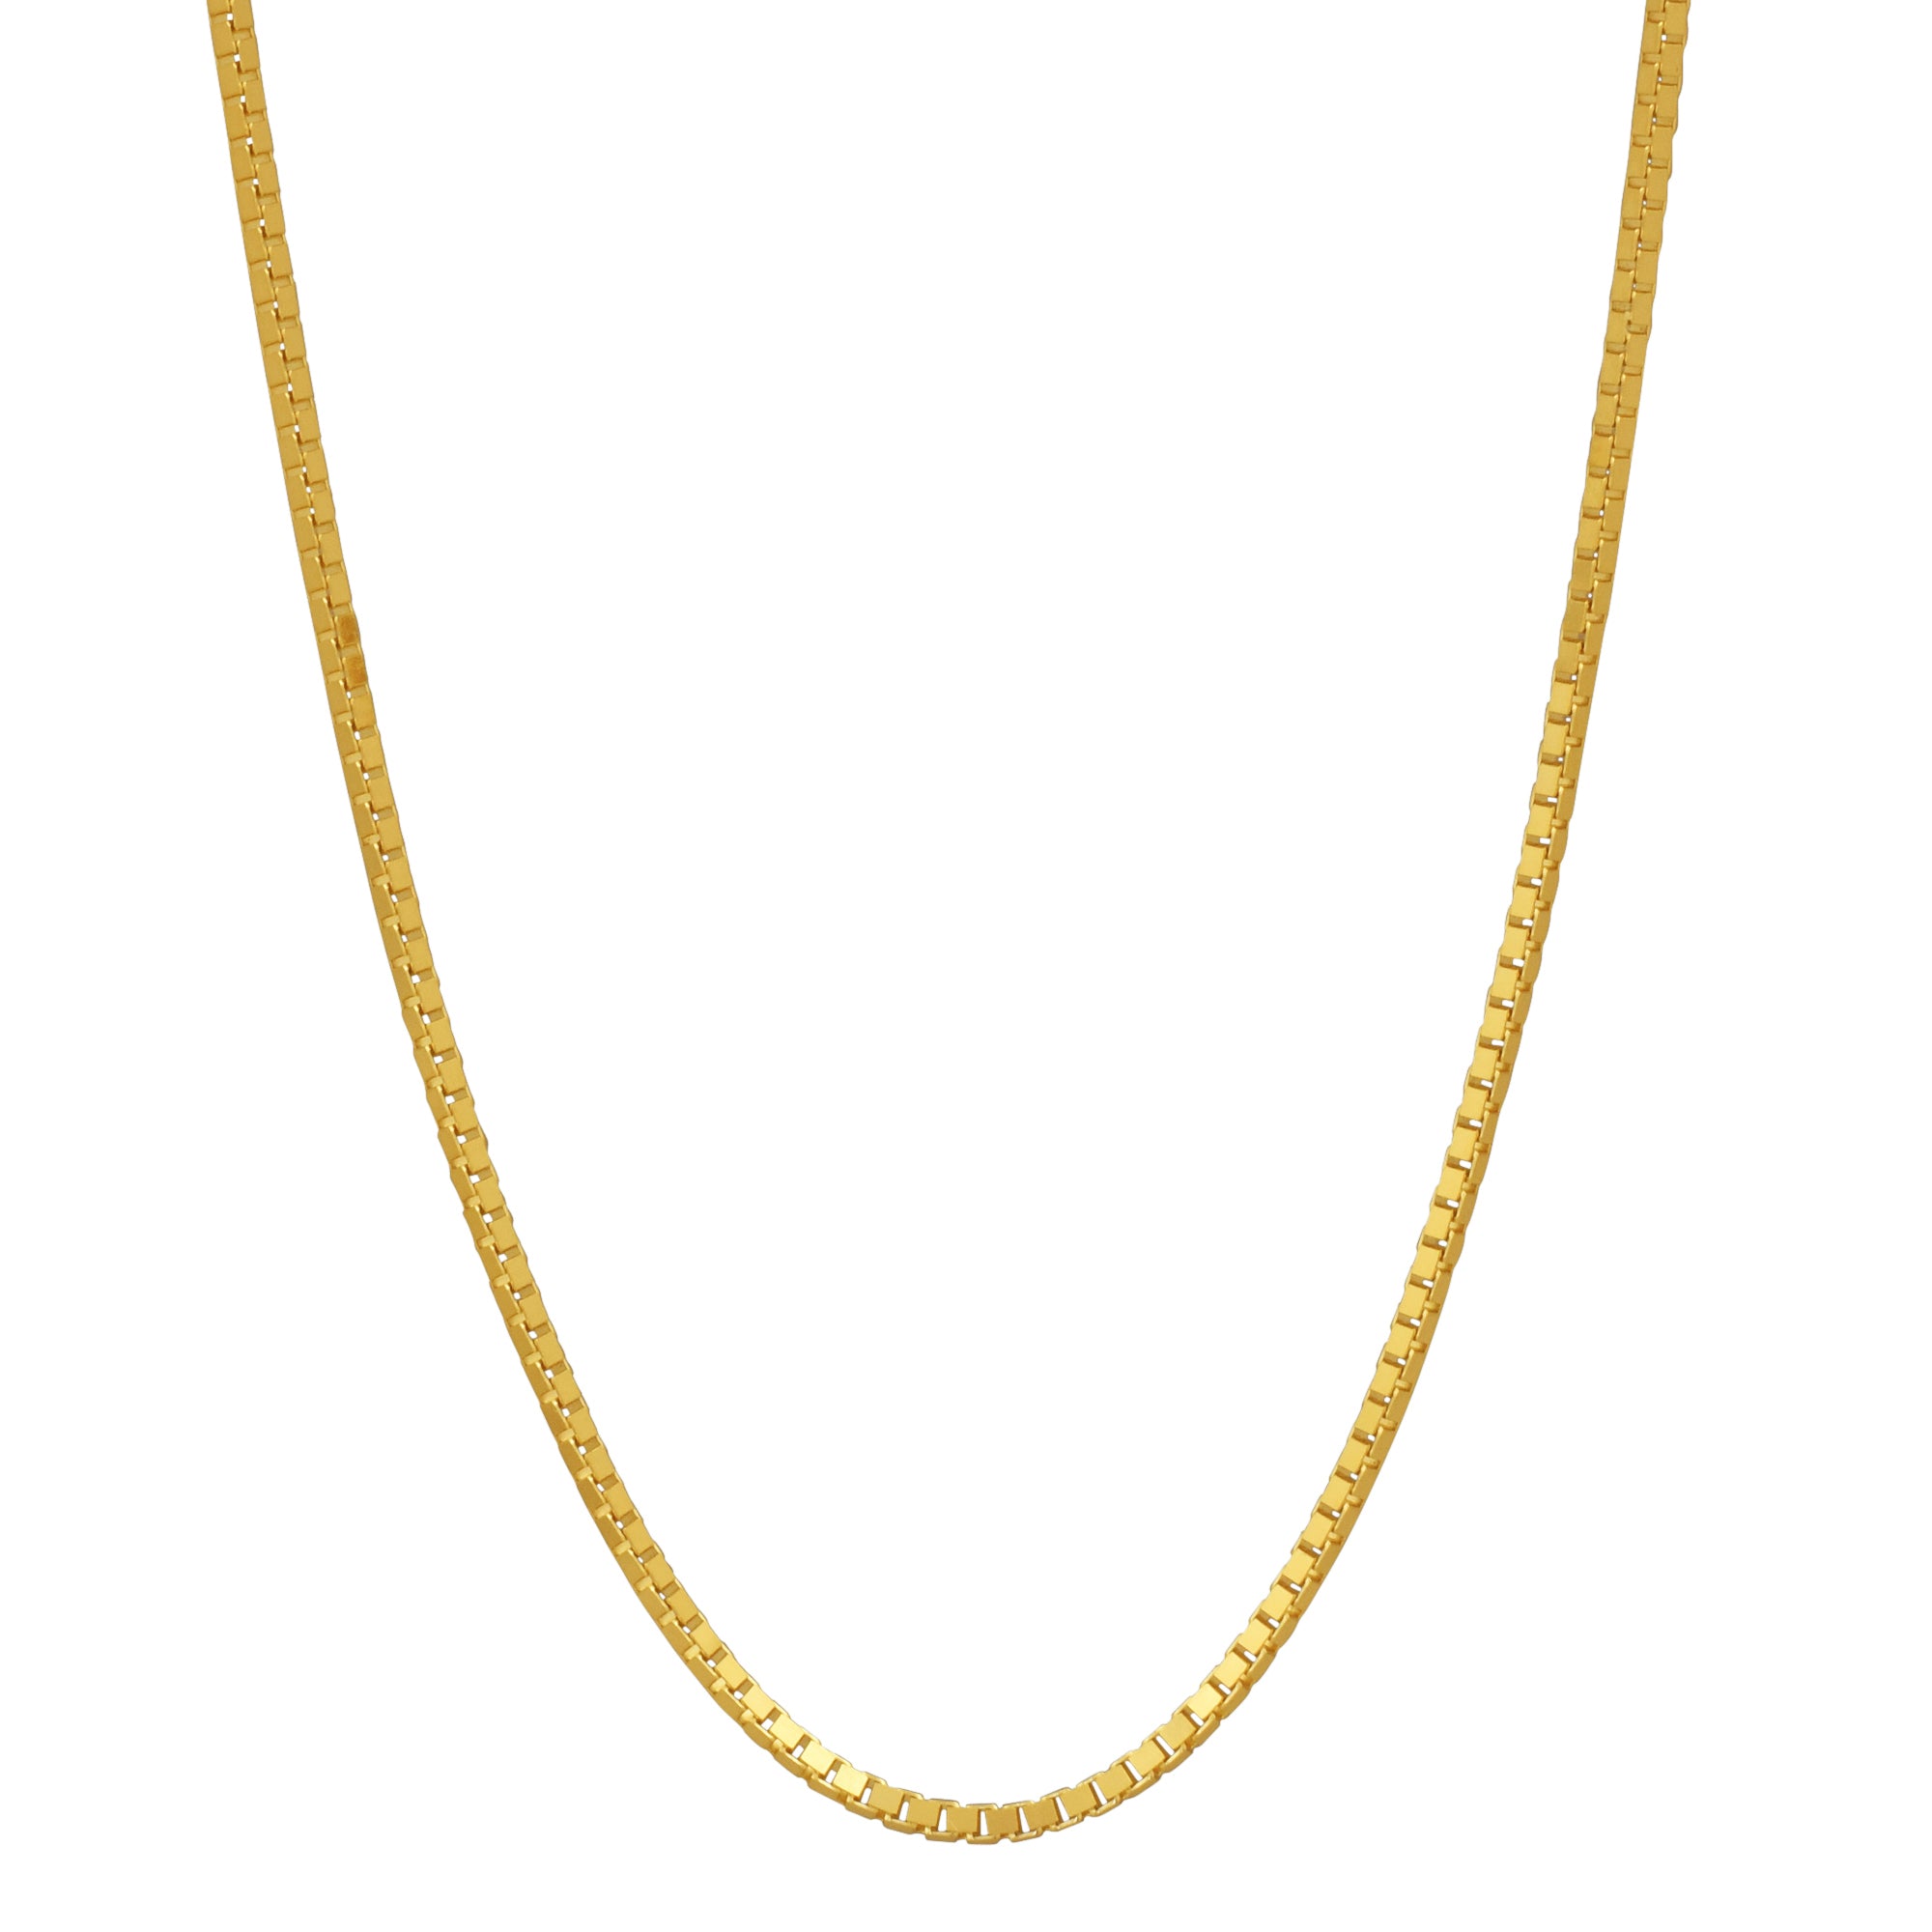 Box Chain in 14kt Yellow Gold (18 inches and 1mm wide)